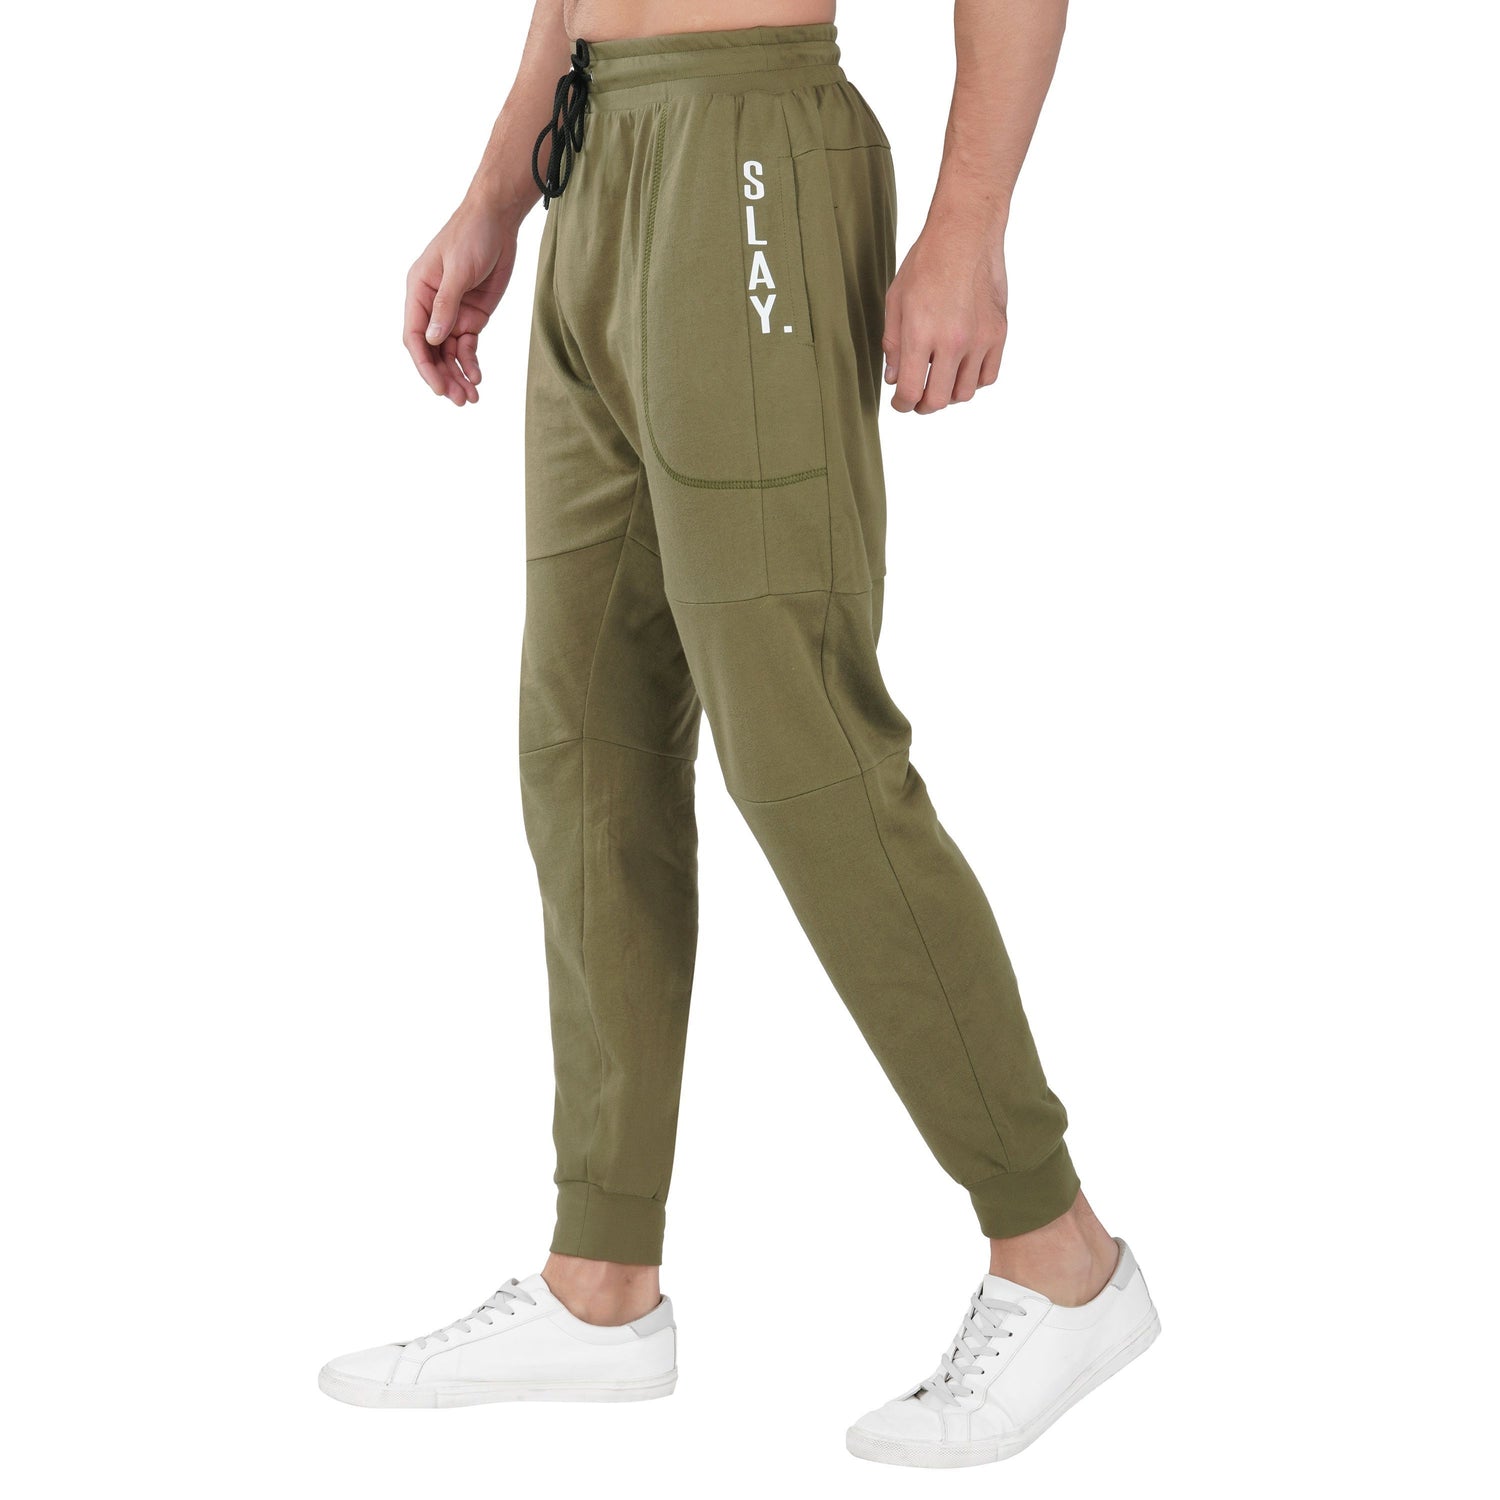 Buy Y&F Kids Solid Olive Green Elasticated Joggers from Westside